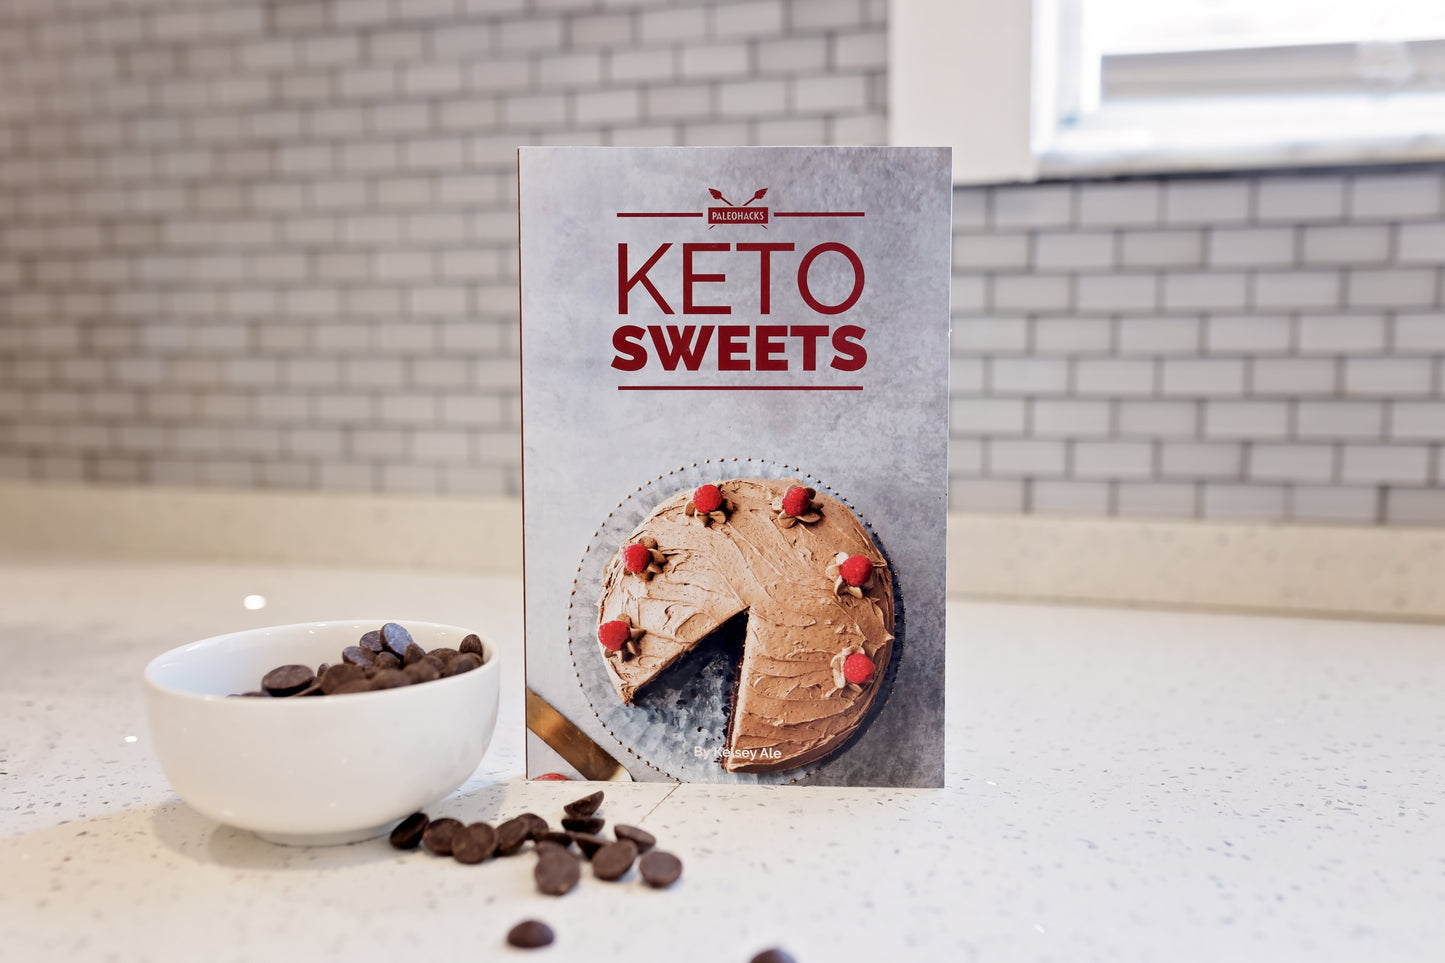 The Keto Sweets Cookbook stands on a plain white surface next to a bowl of chocolate chips.